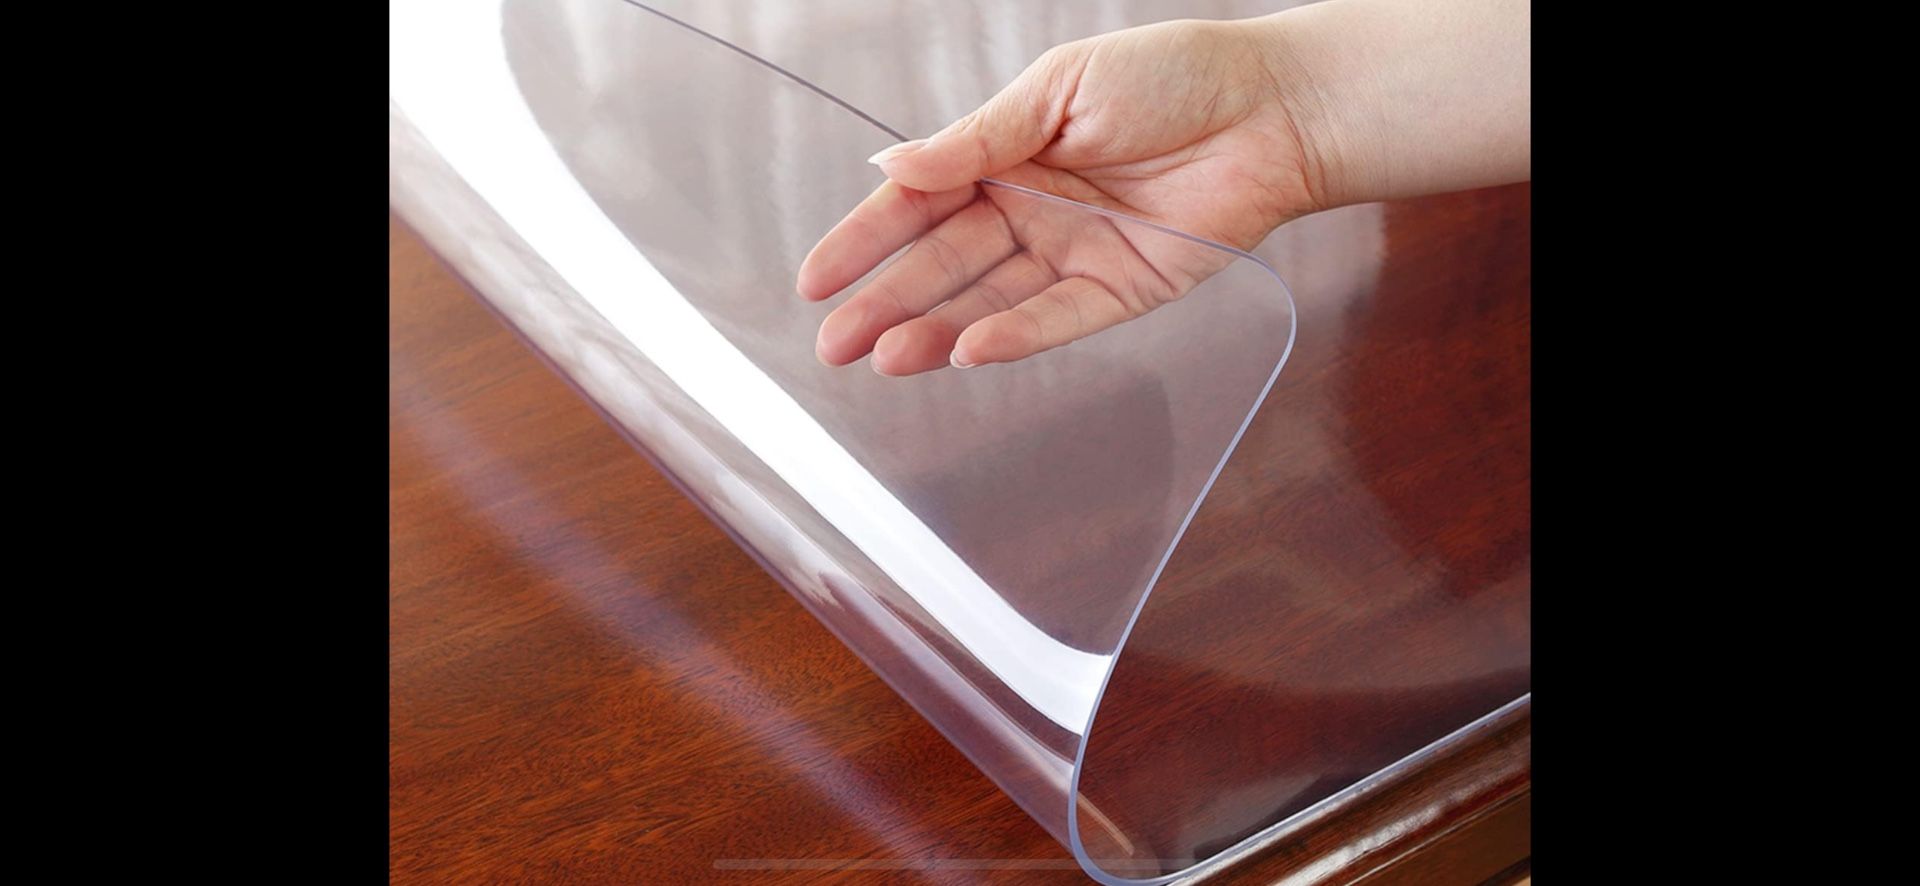 New Clear Table Cover Protector 2mm Thick 40 x 78 Inch Table Protector for Dining Room Table, Dining Table Cover Protector, Plastic Table Cover, 